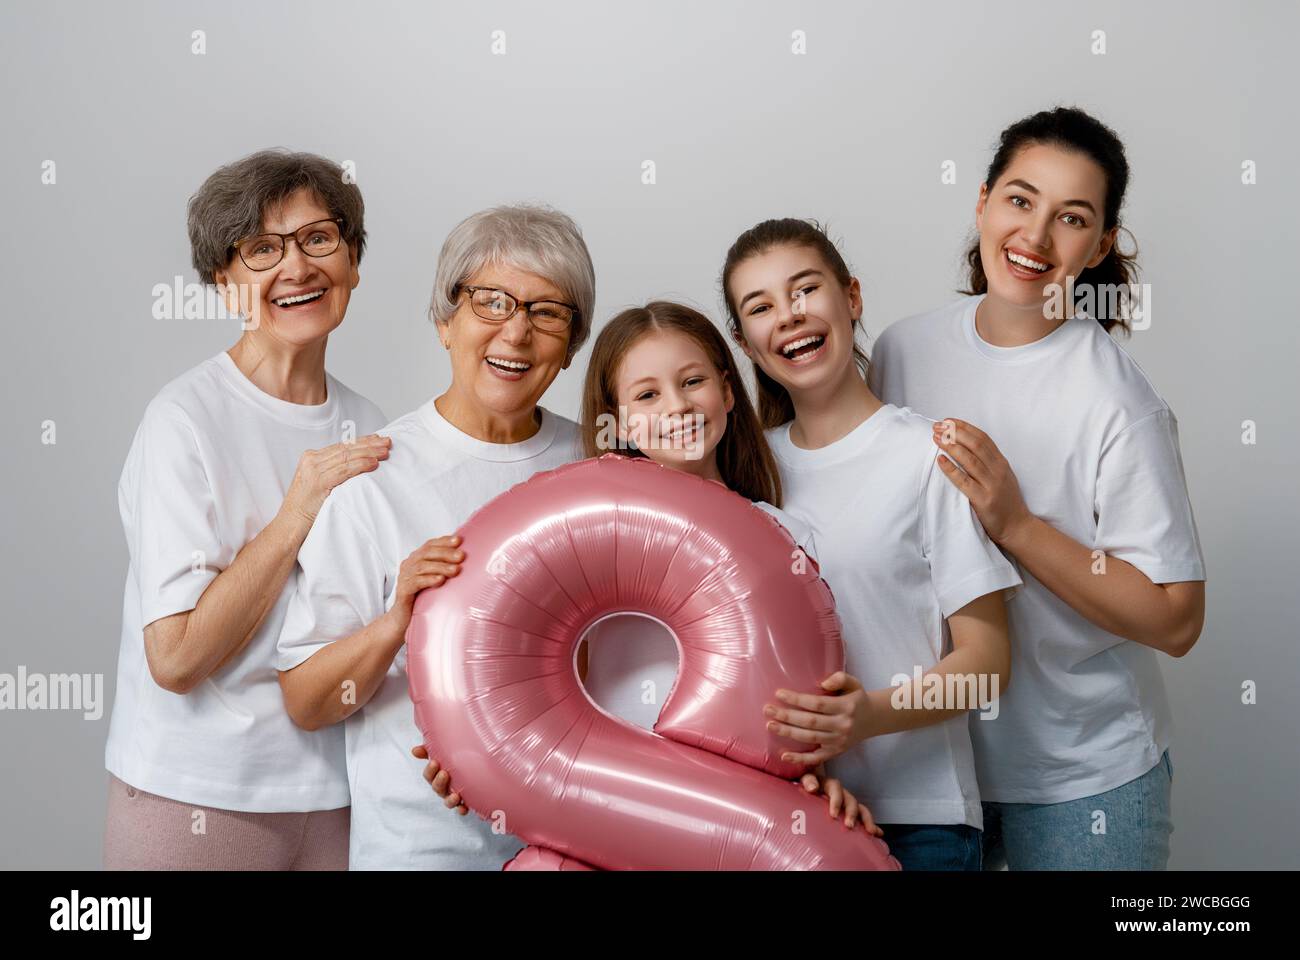 Happy day. Children daughters, mother and grandmothers with air balloon. Family holiday and togetherness. Concept of International Women's Day. Stock Photo